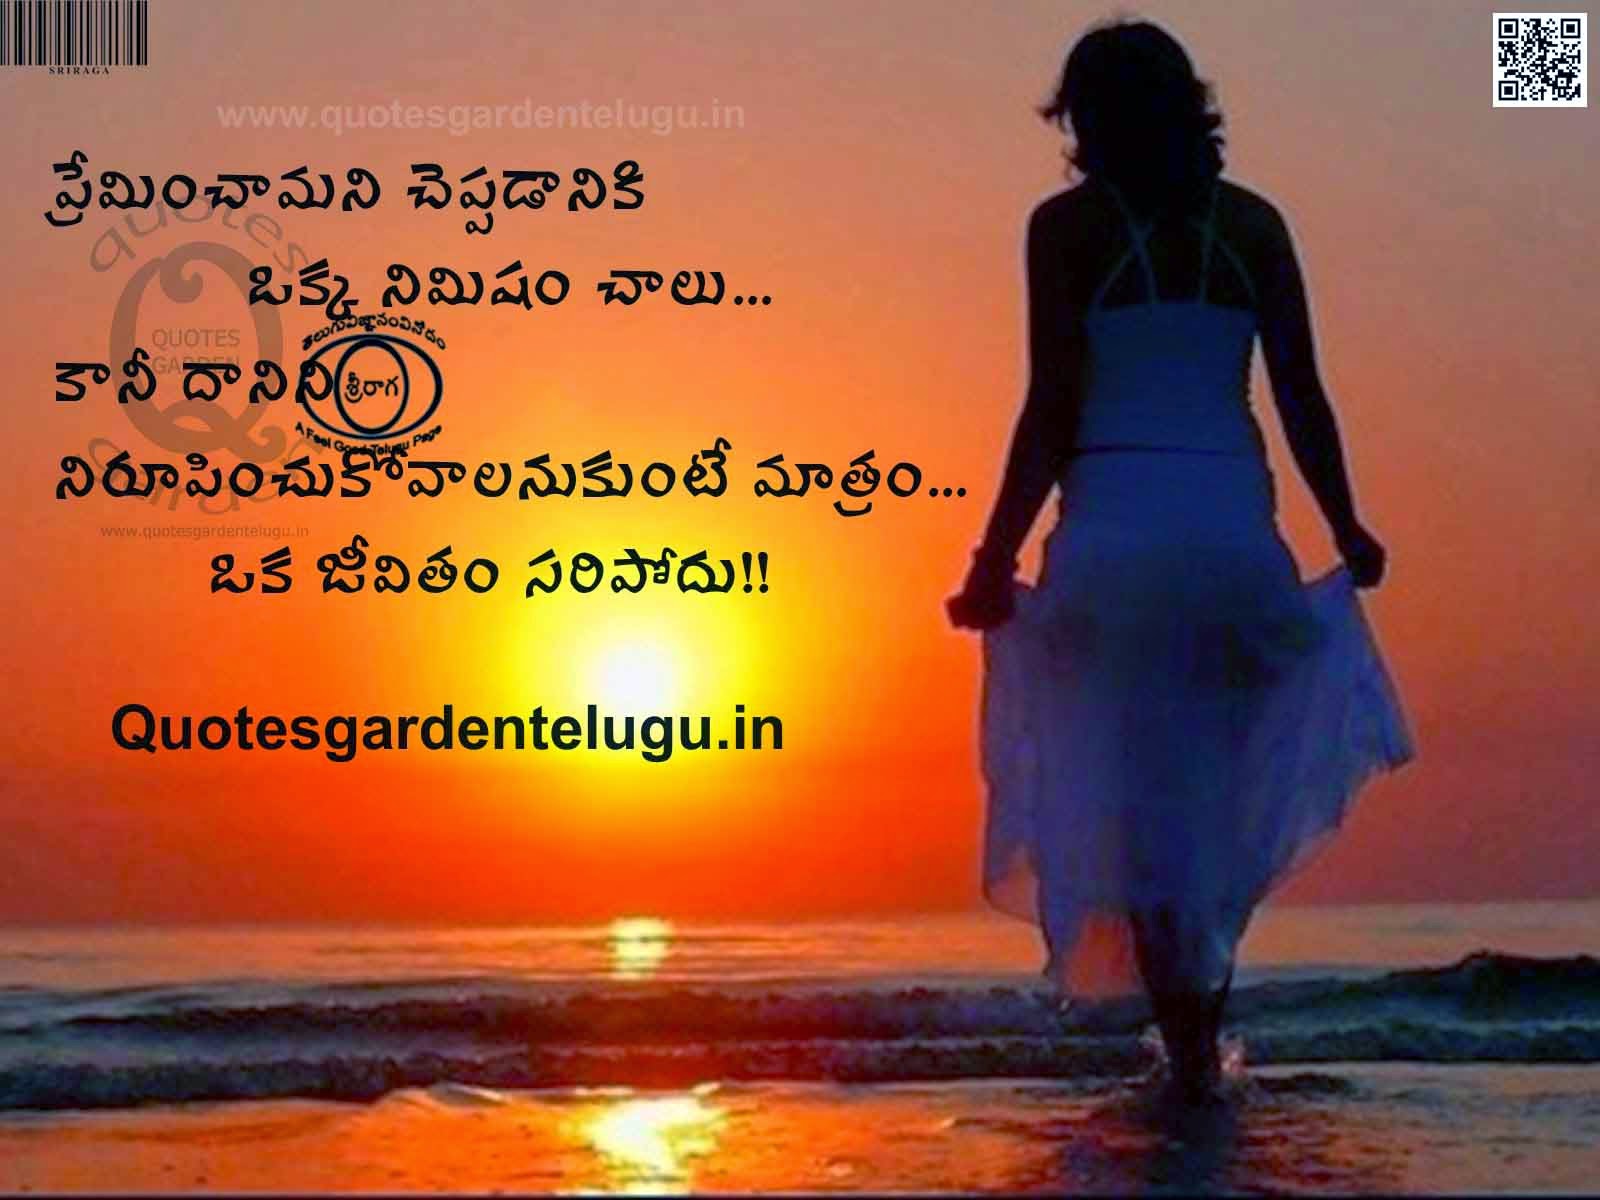 Best Telugu Love Quotes with Images HDwallpapers | QUOTES GARDEN TELUGU